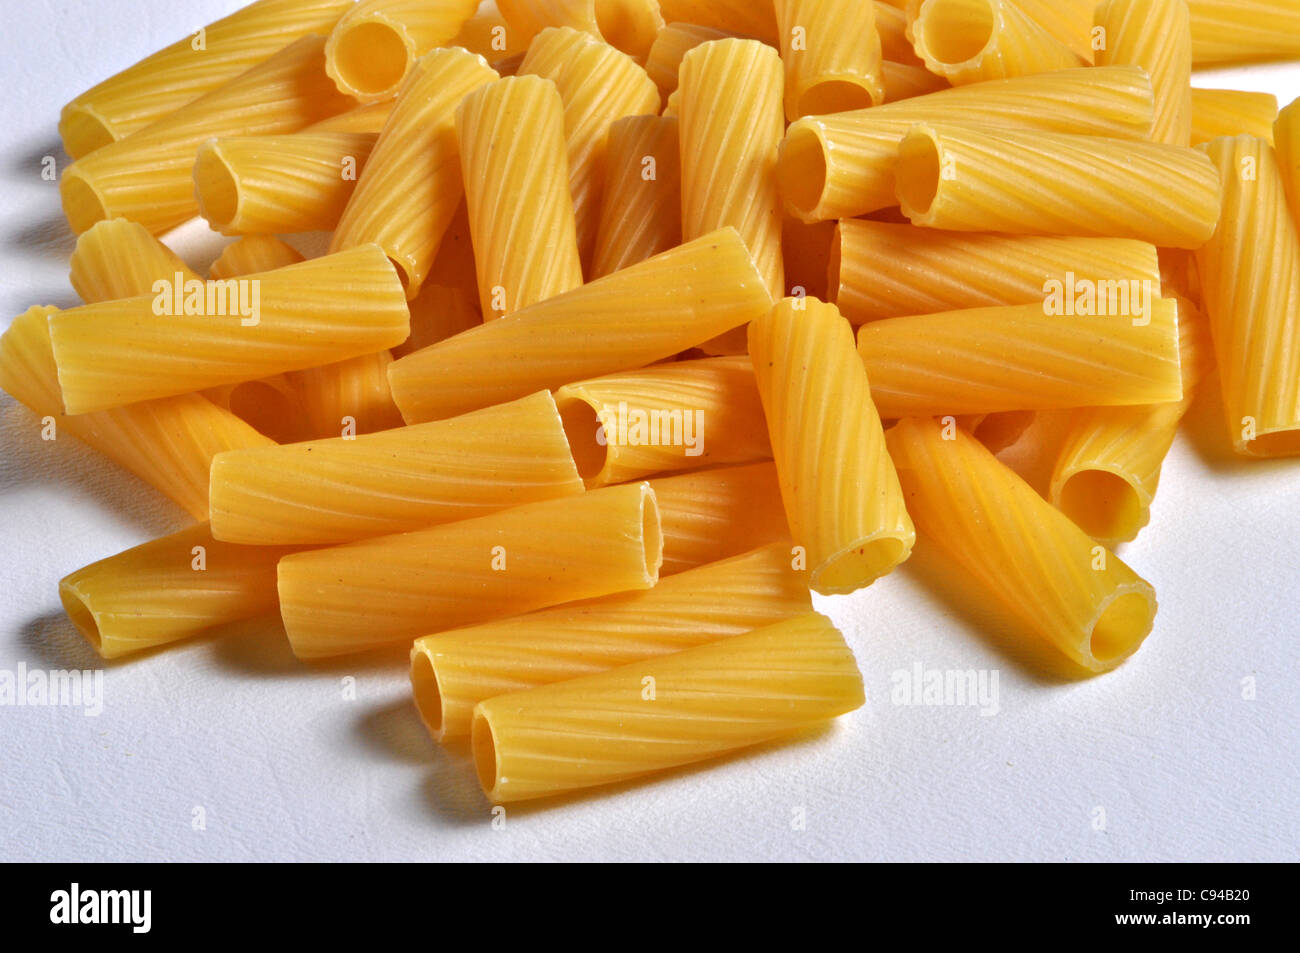 A pile of rigatoni pasta sits on a plain background. Stock Photo